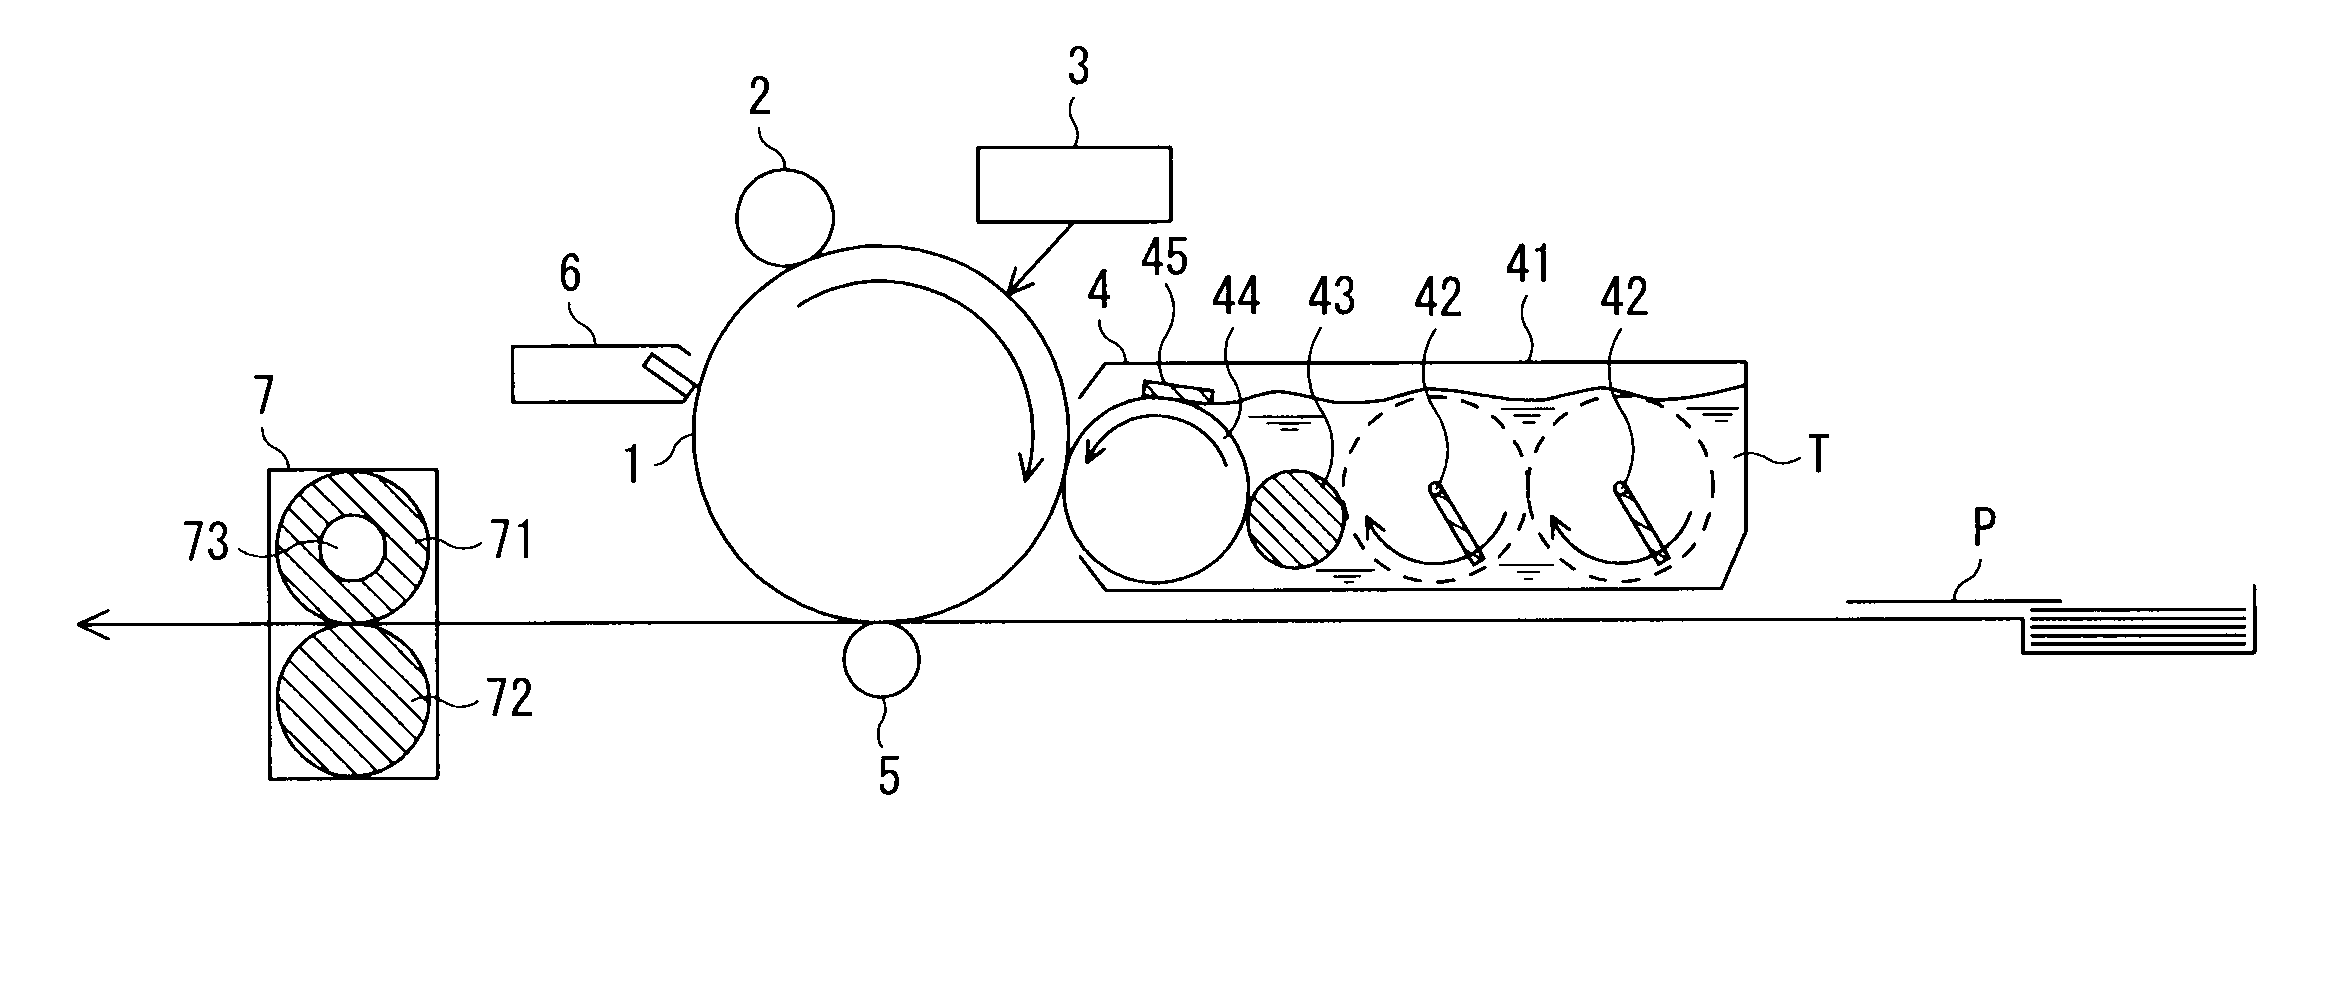 Coating liquid for forming undercoat layer, photoreceptor having undercoat layer formed of the coating liquid, image-forming apparatus including the photoreceptor, and electrophotographic cartridge including the photoreceptor